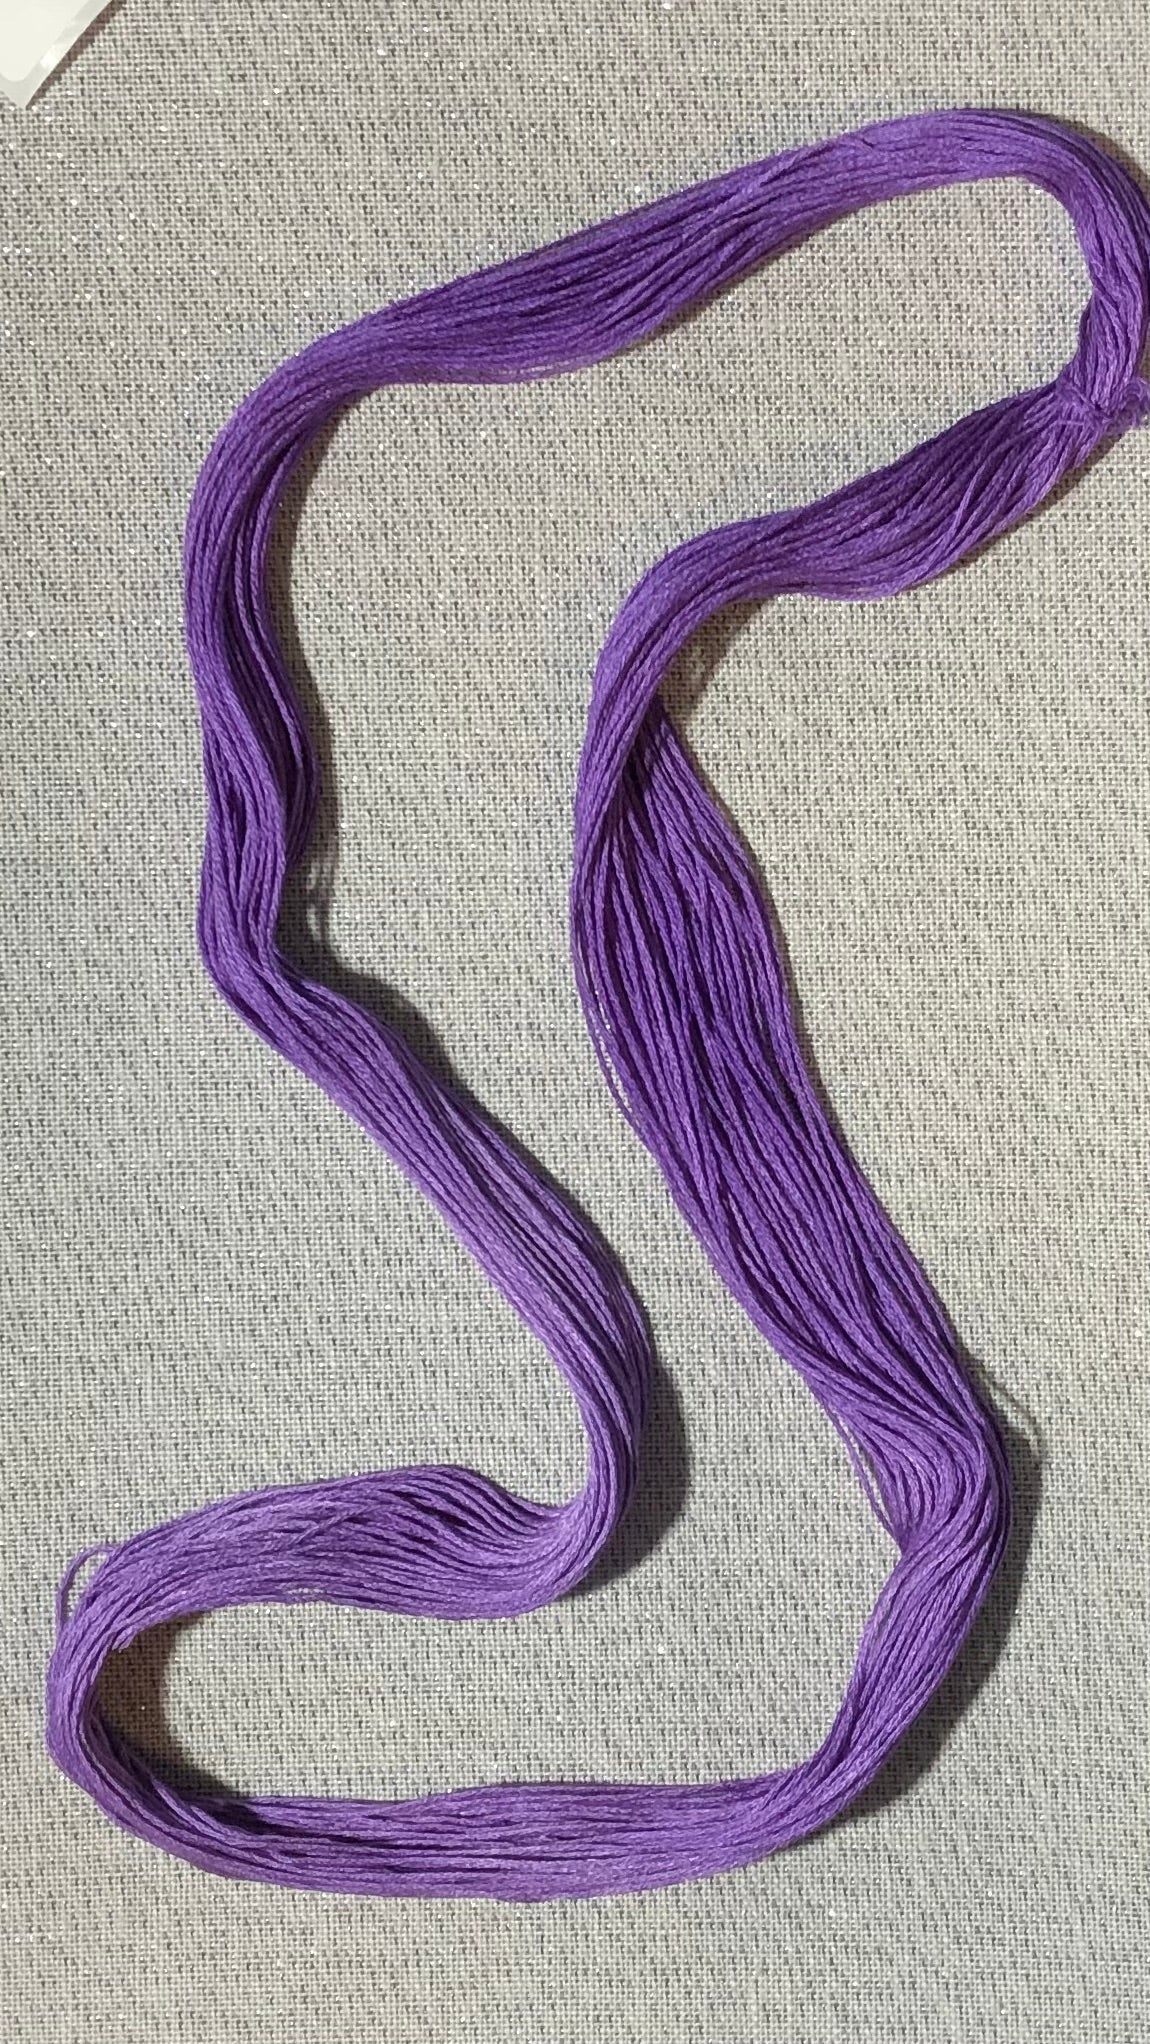 Silk hand dyed floss - Reign Over Me - Dyeing for Cross Stitch